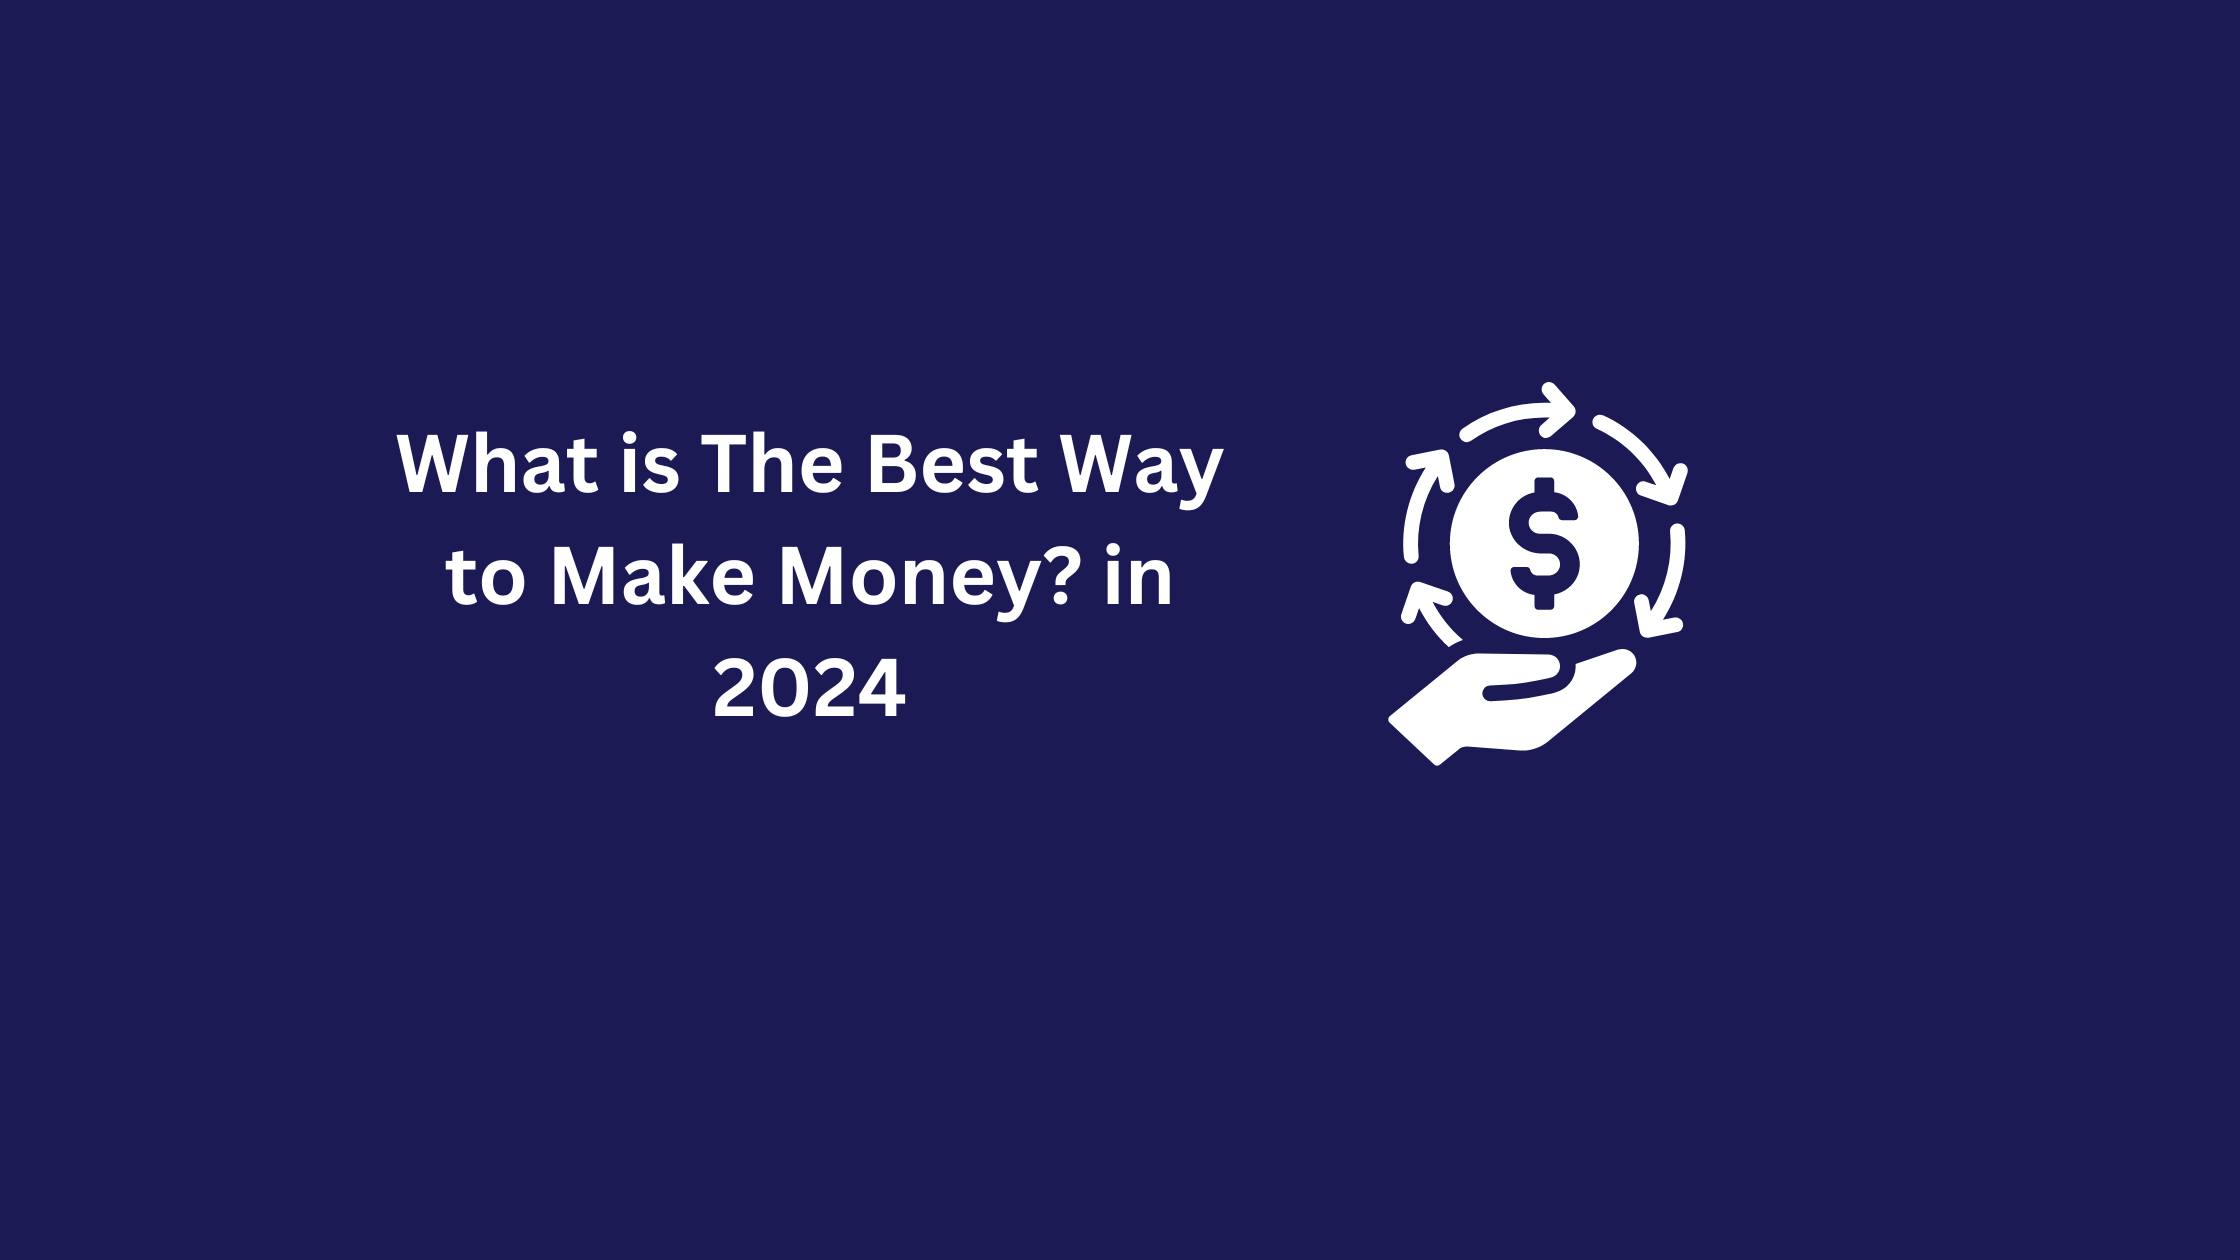 What is The Best Way to Make Money? in 2024